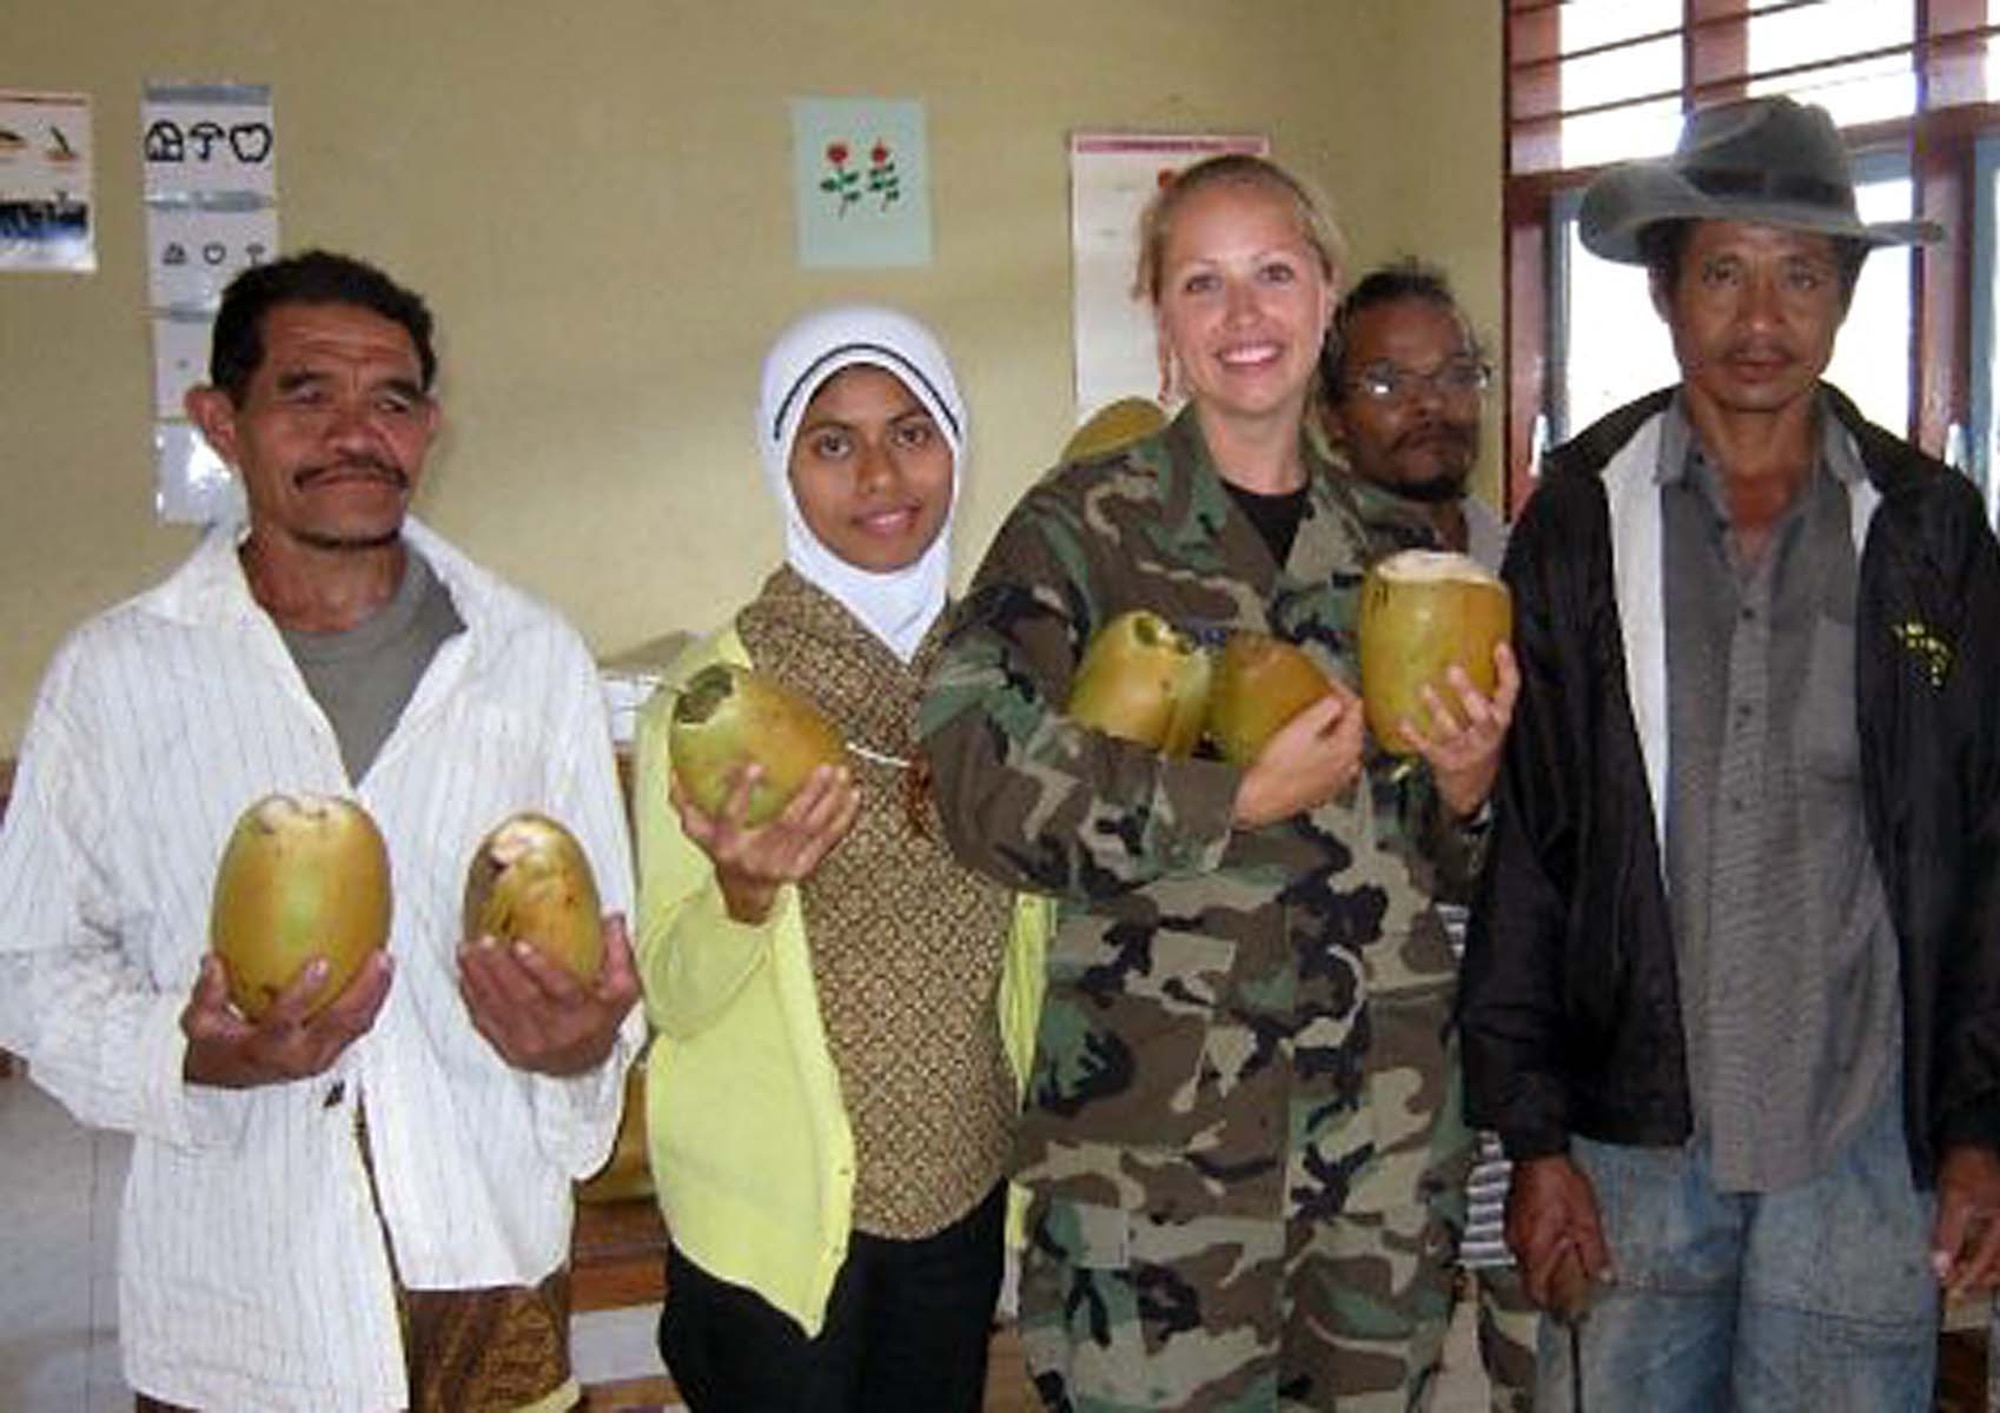 Staff Sgt. Carrie Conley, 446th Aerospace Medicine Squadron, McChord Air Force Base, Wash., recieves coconuts from a group of locals as a sign of thanks after giving candy to some Timorese children candy while on deployment to West Timor in support of Pacific Angel and its continuing humanitarian mission.  (Courtesy photo)